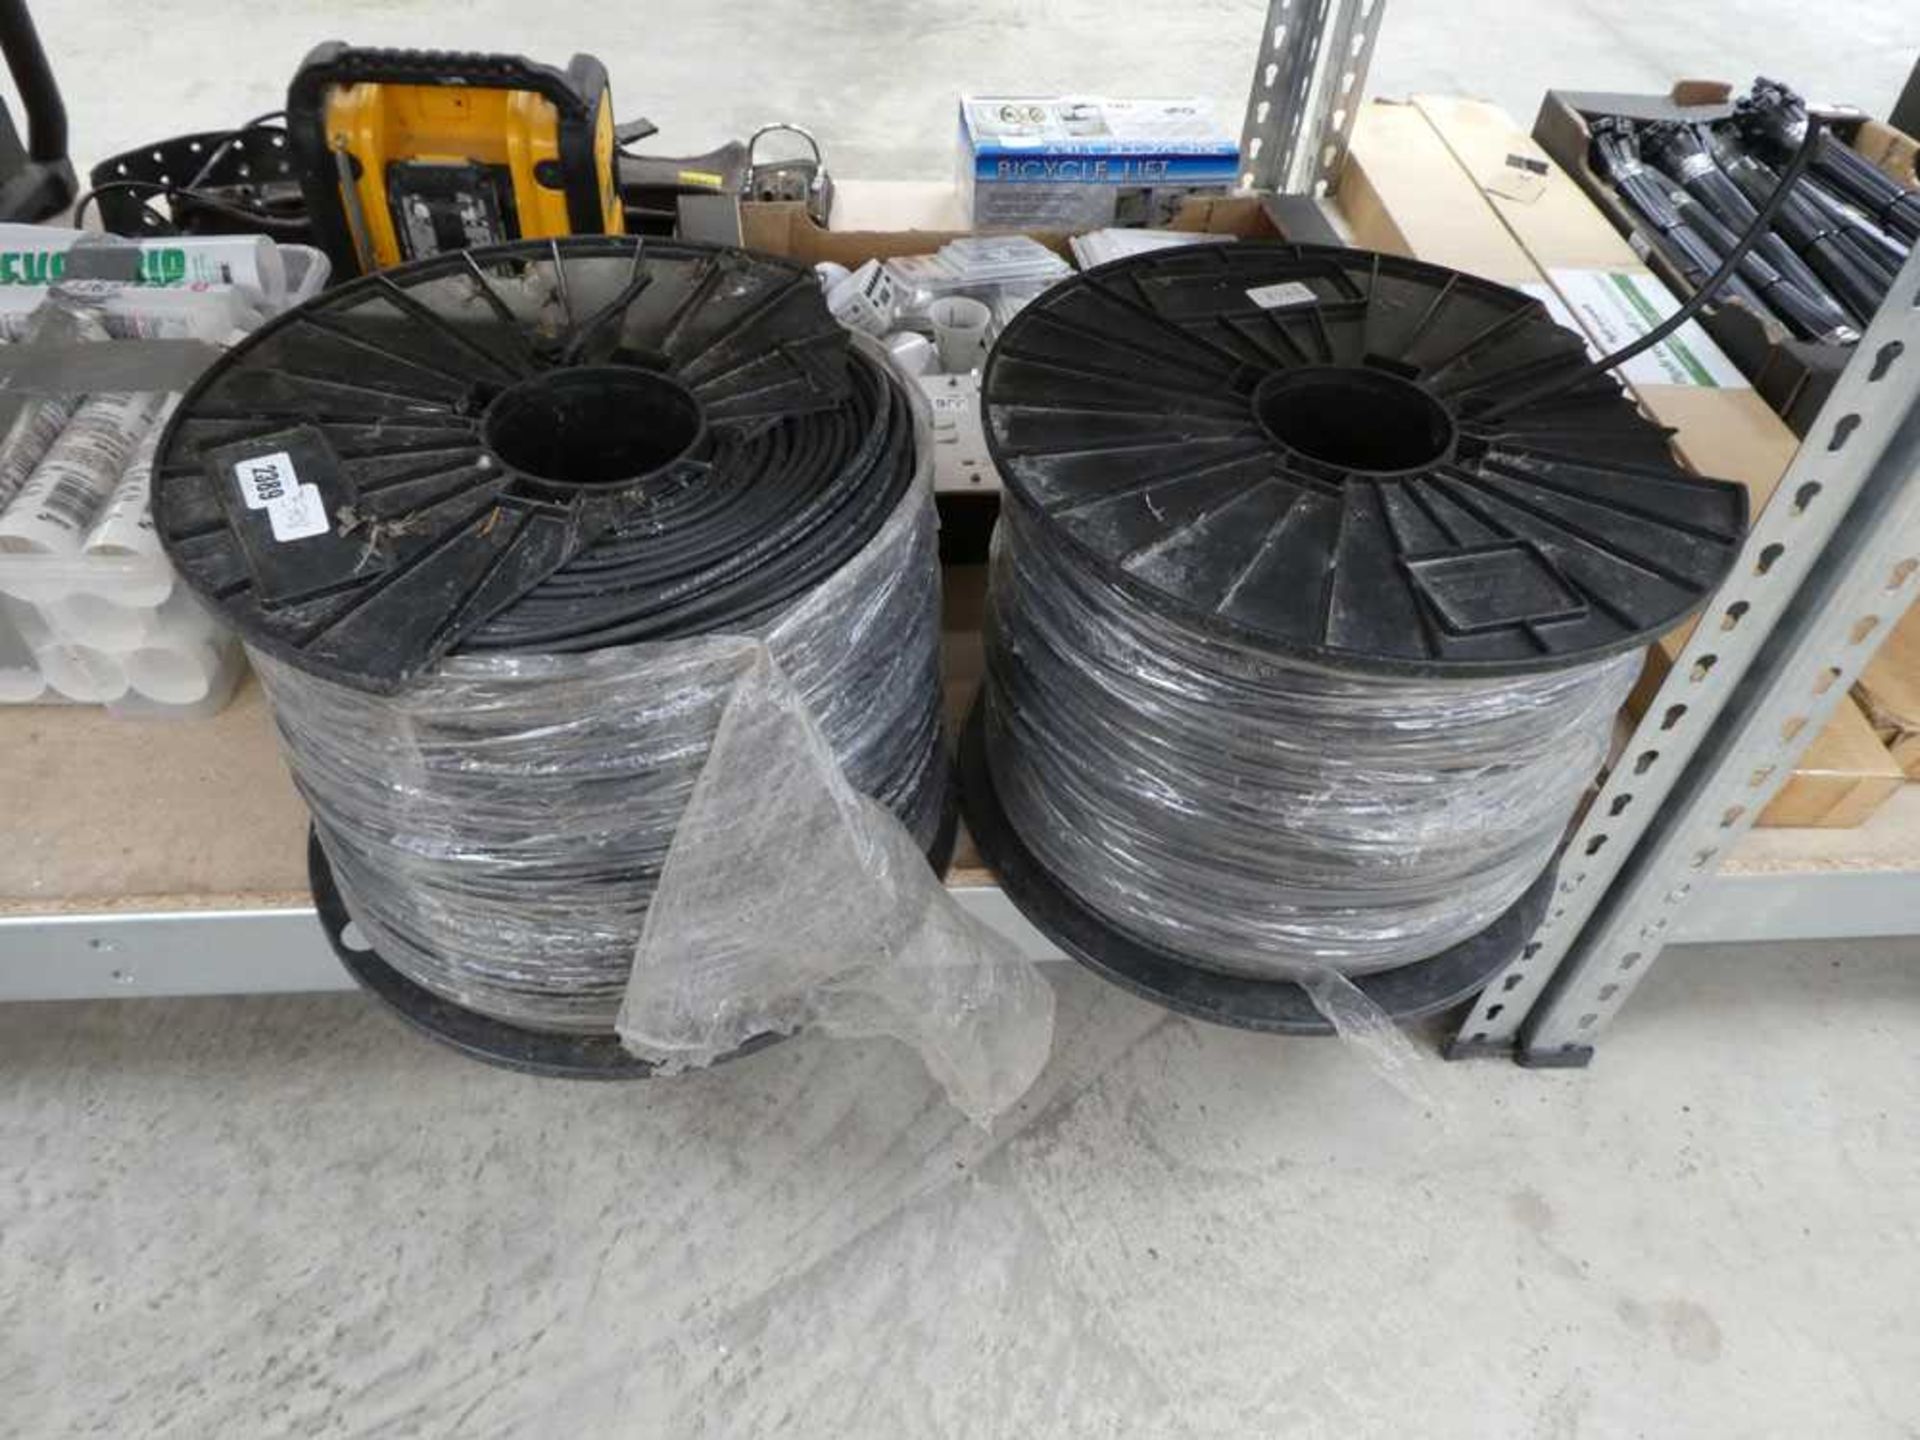 2 reels of DC photo cable